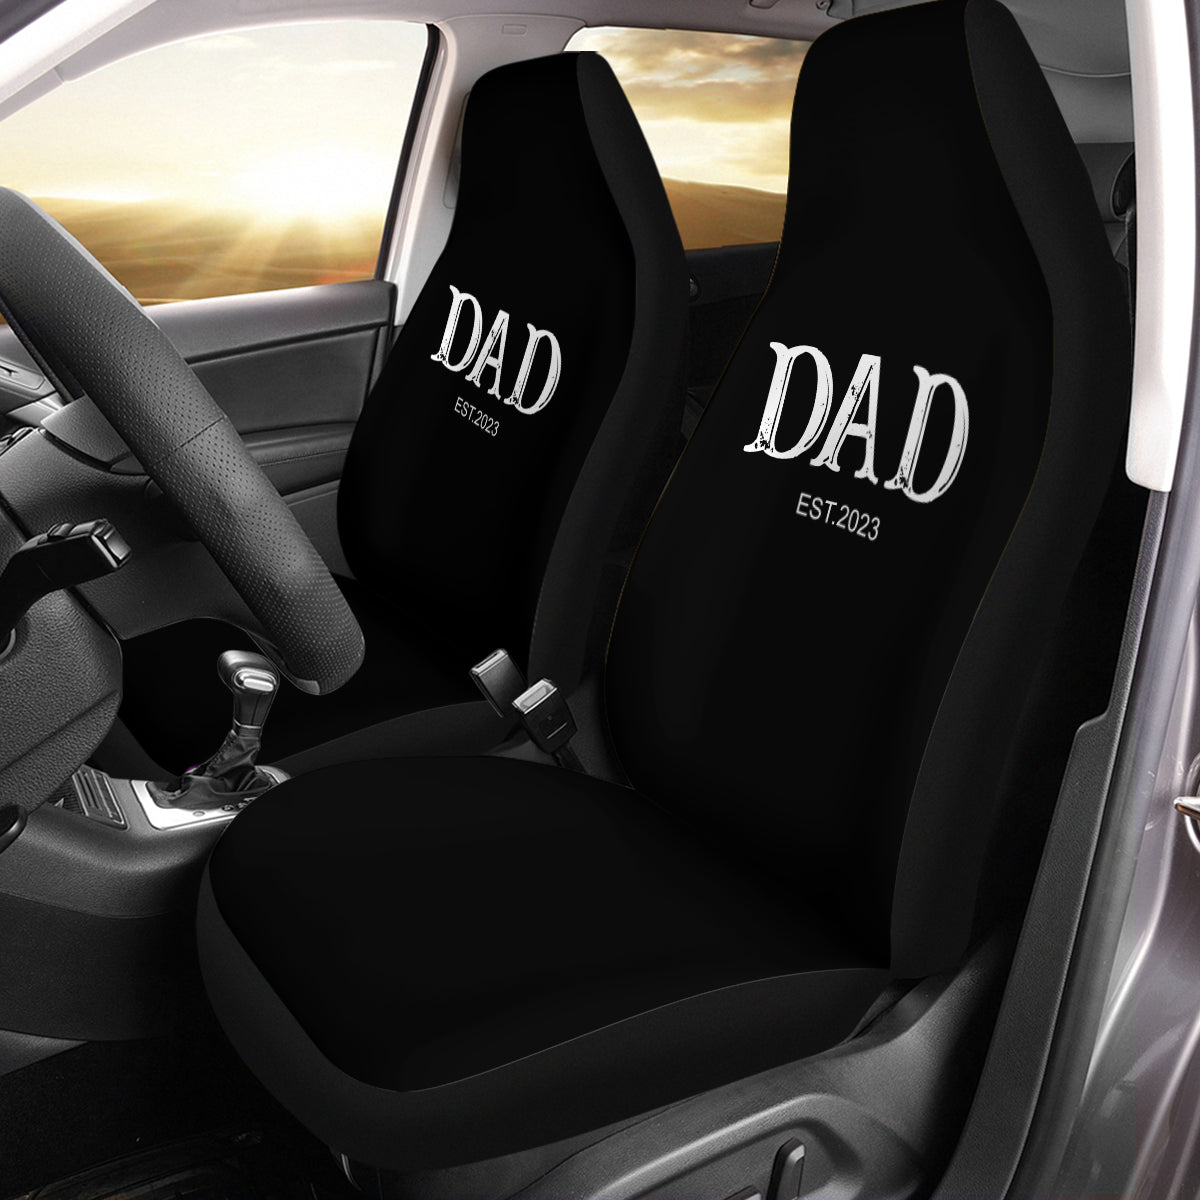 Car Seat Covers, Custom For Your Cars, DADDY EST YEAR, Happy Father's Day, Car Bucket Seat Protection Airbag Compatible 2 PCS, Car Accessories, Gift for Daddy 03